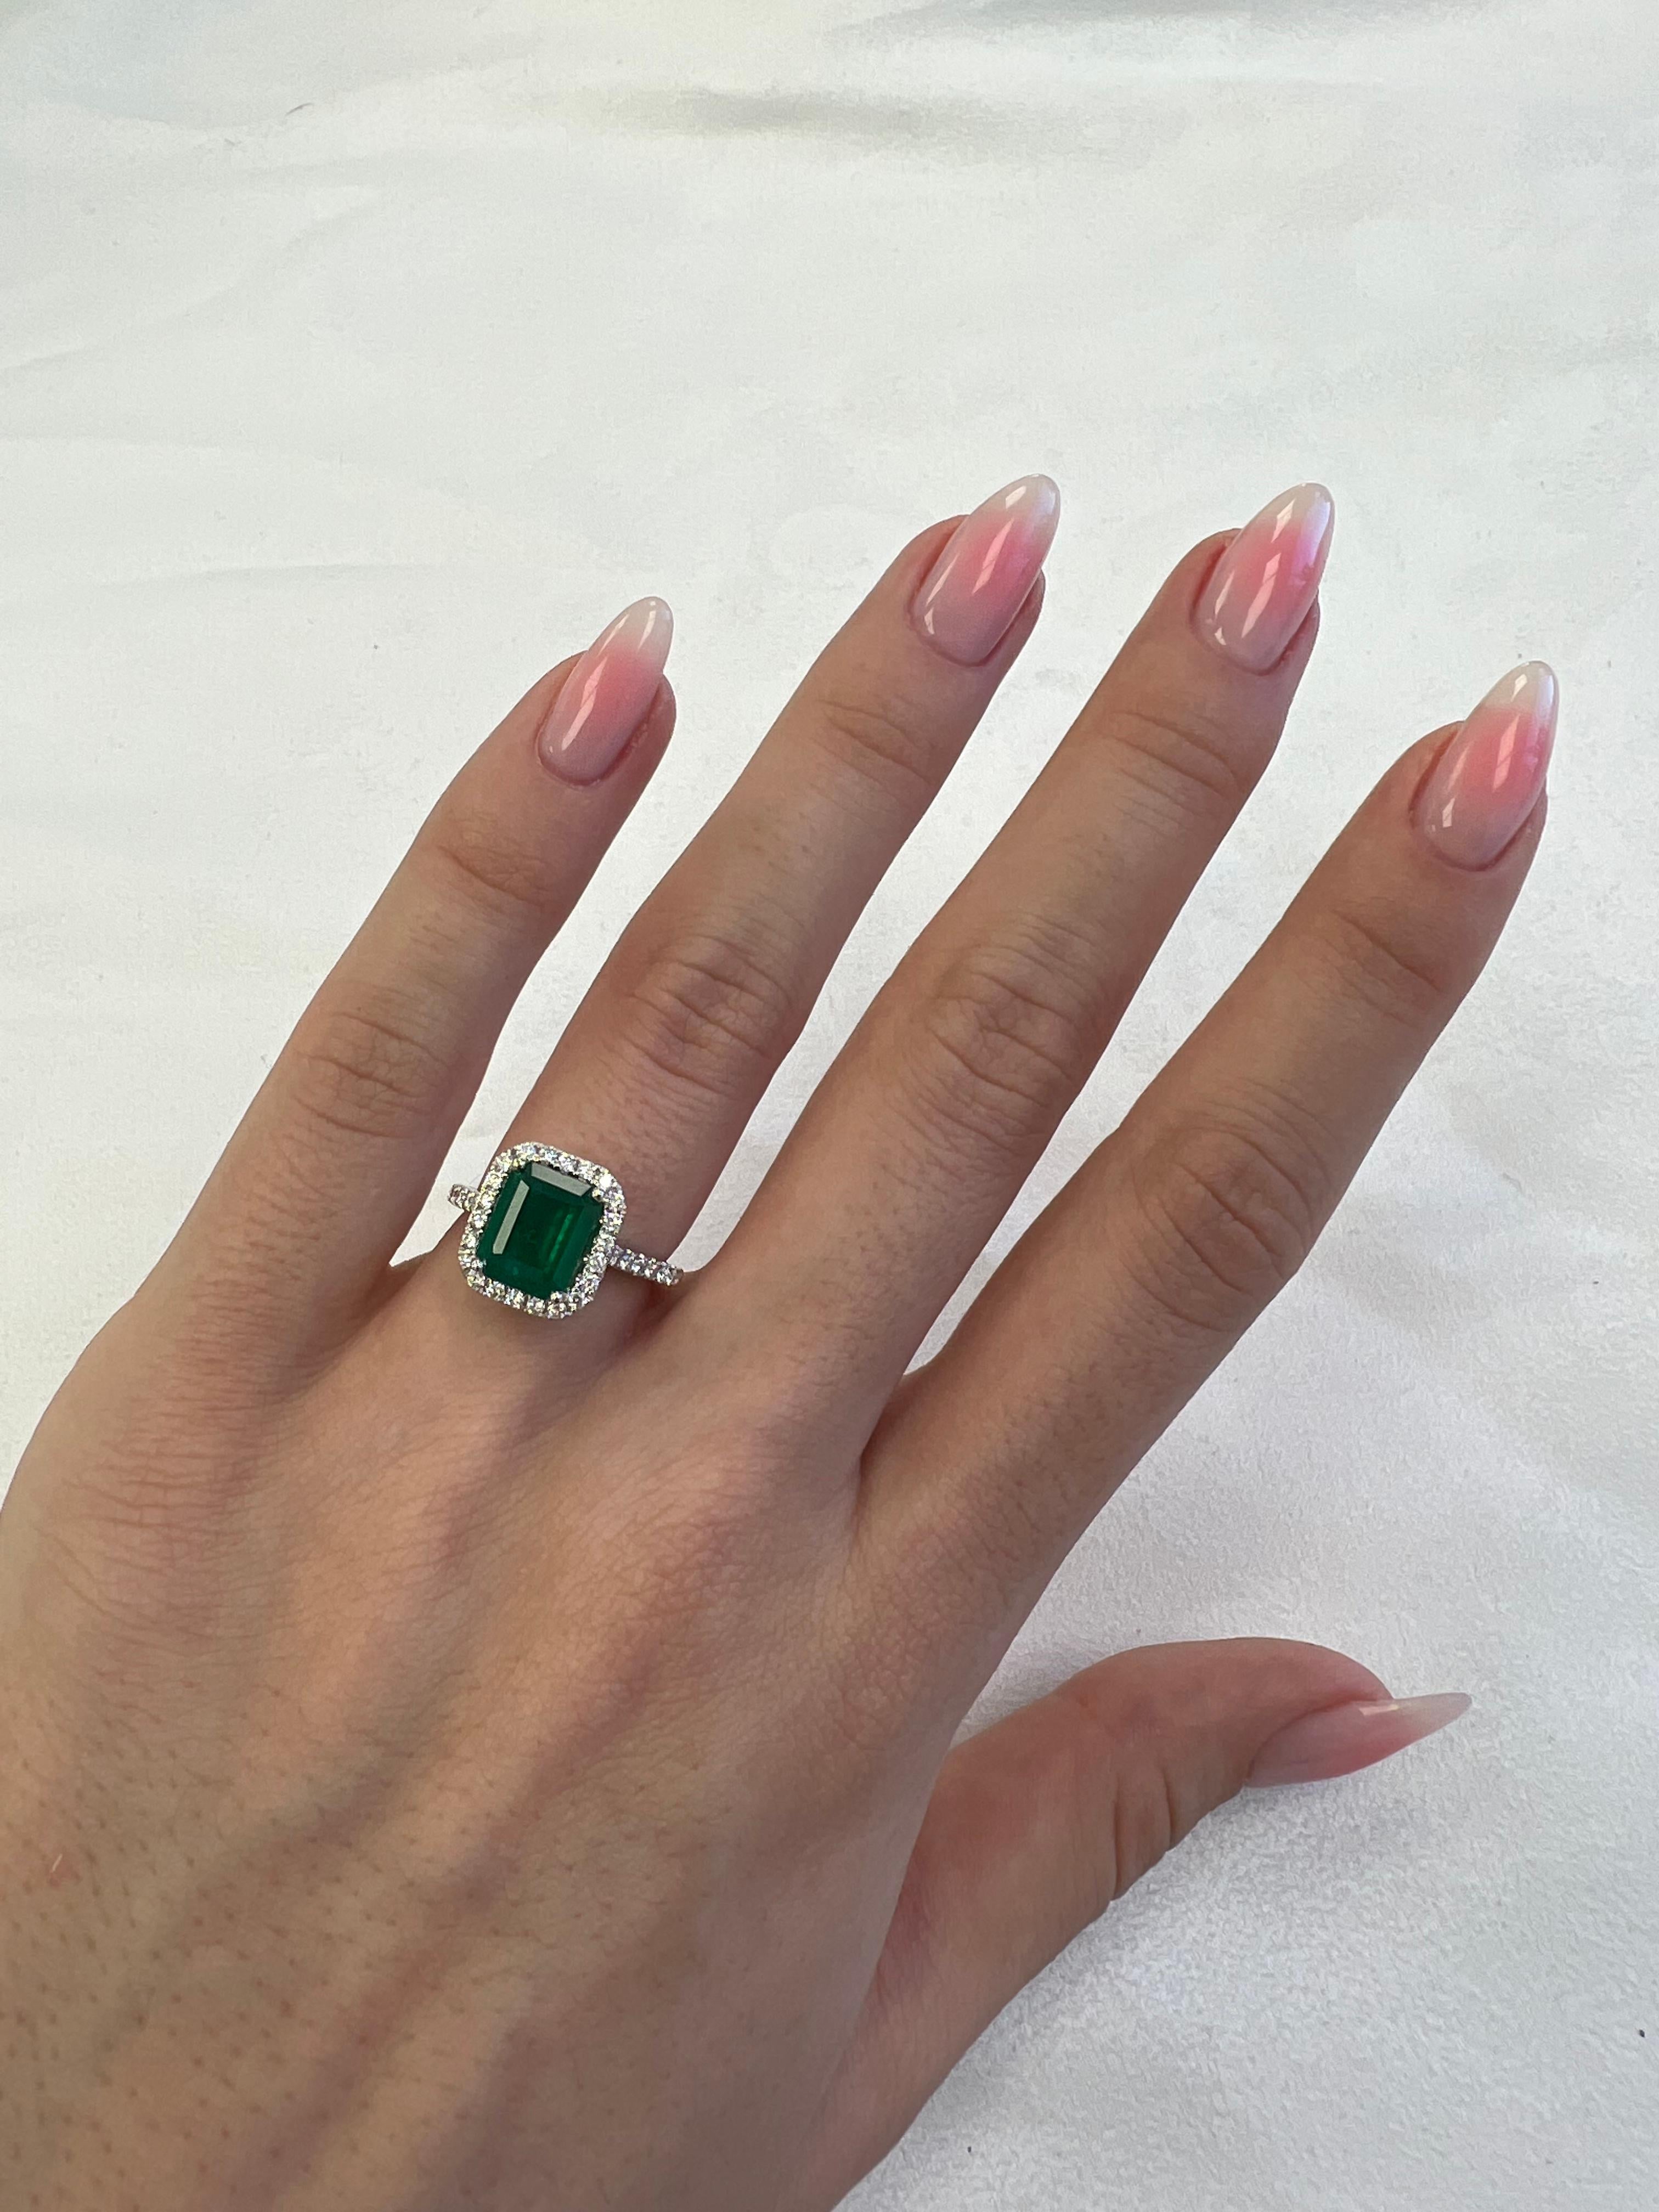 Classic emerald and diamond halo ring, GIA certified. 
2.83 carats total gemstone weight.
2.37 carat emerald cut emerald, F2, GIA certified. Complimented by 38 round brilliant diamonds, 0.46 carats, F/G color and VS clarity. 18k white gold, 4.71